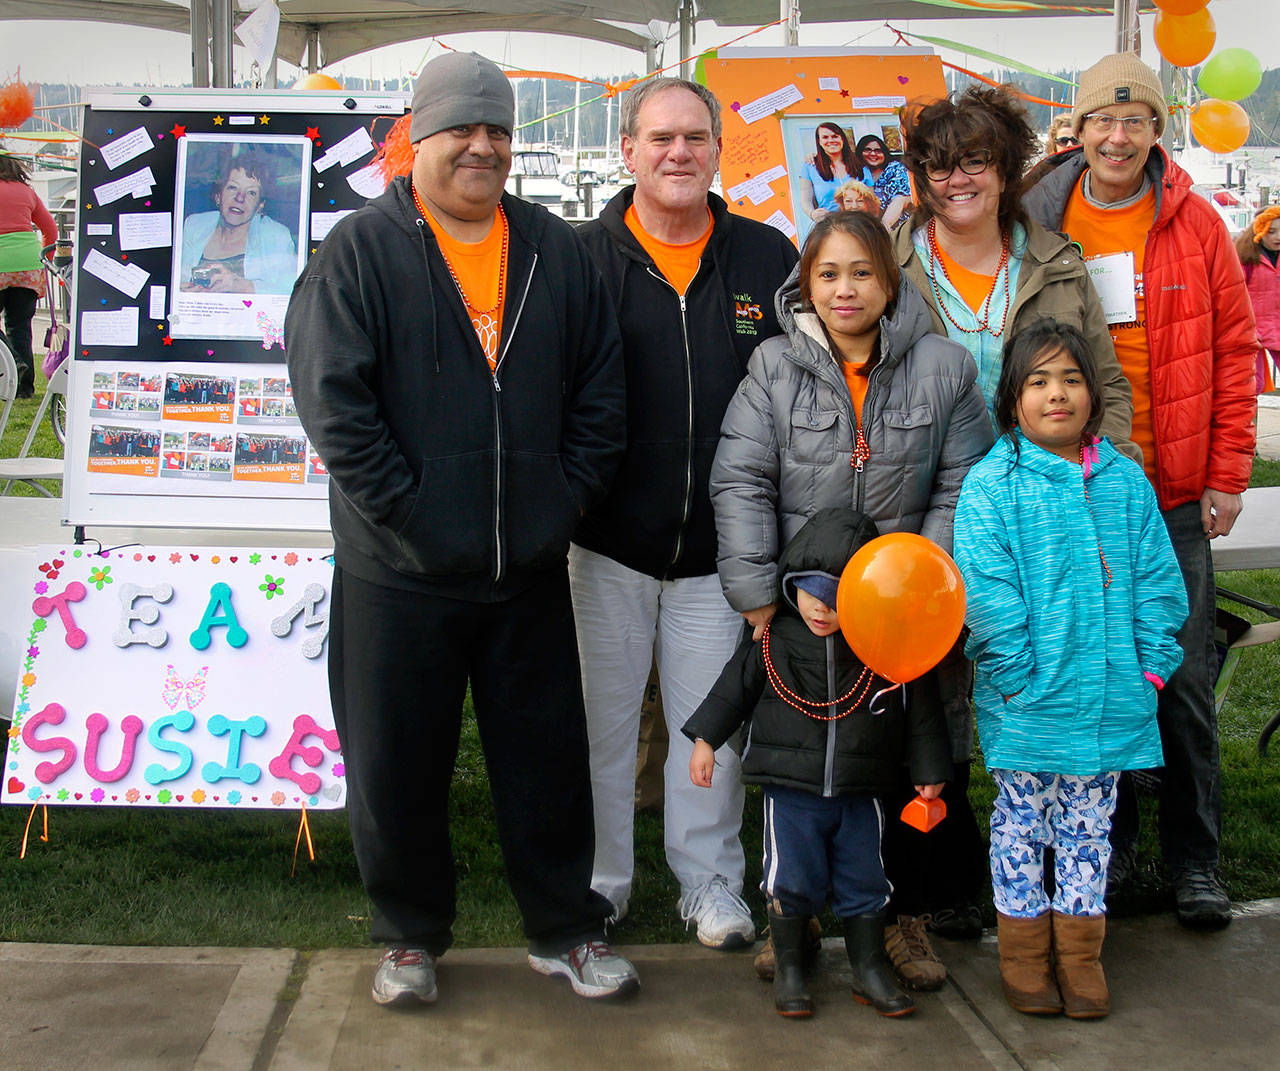 Team Susie from Port Ludlow honored the memory of the late Susue Vicino, her husband, Felix, said. From left, Robert Ramos, Felix Vicino, Jem Ramos, Gordi Fitzpatrick, Paul Olafson. Two children in front row were not identified. (Terryl Asla/Kitsap News Group)